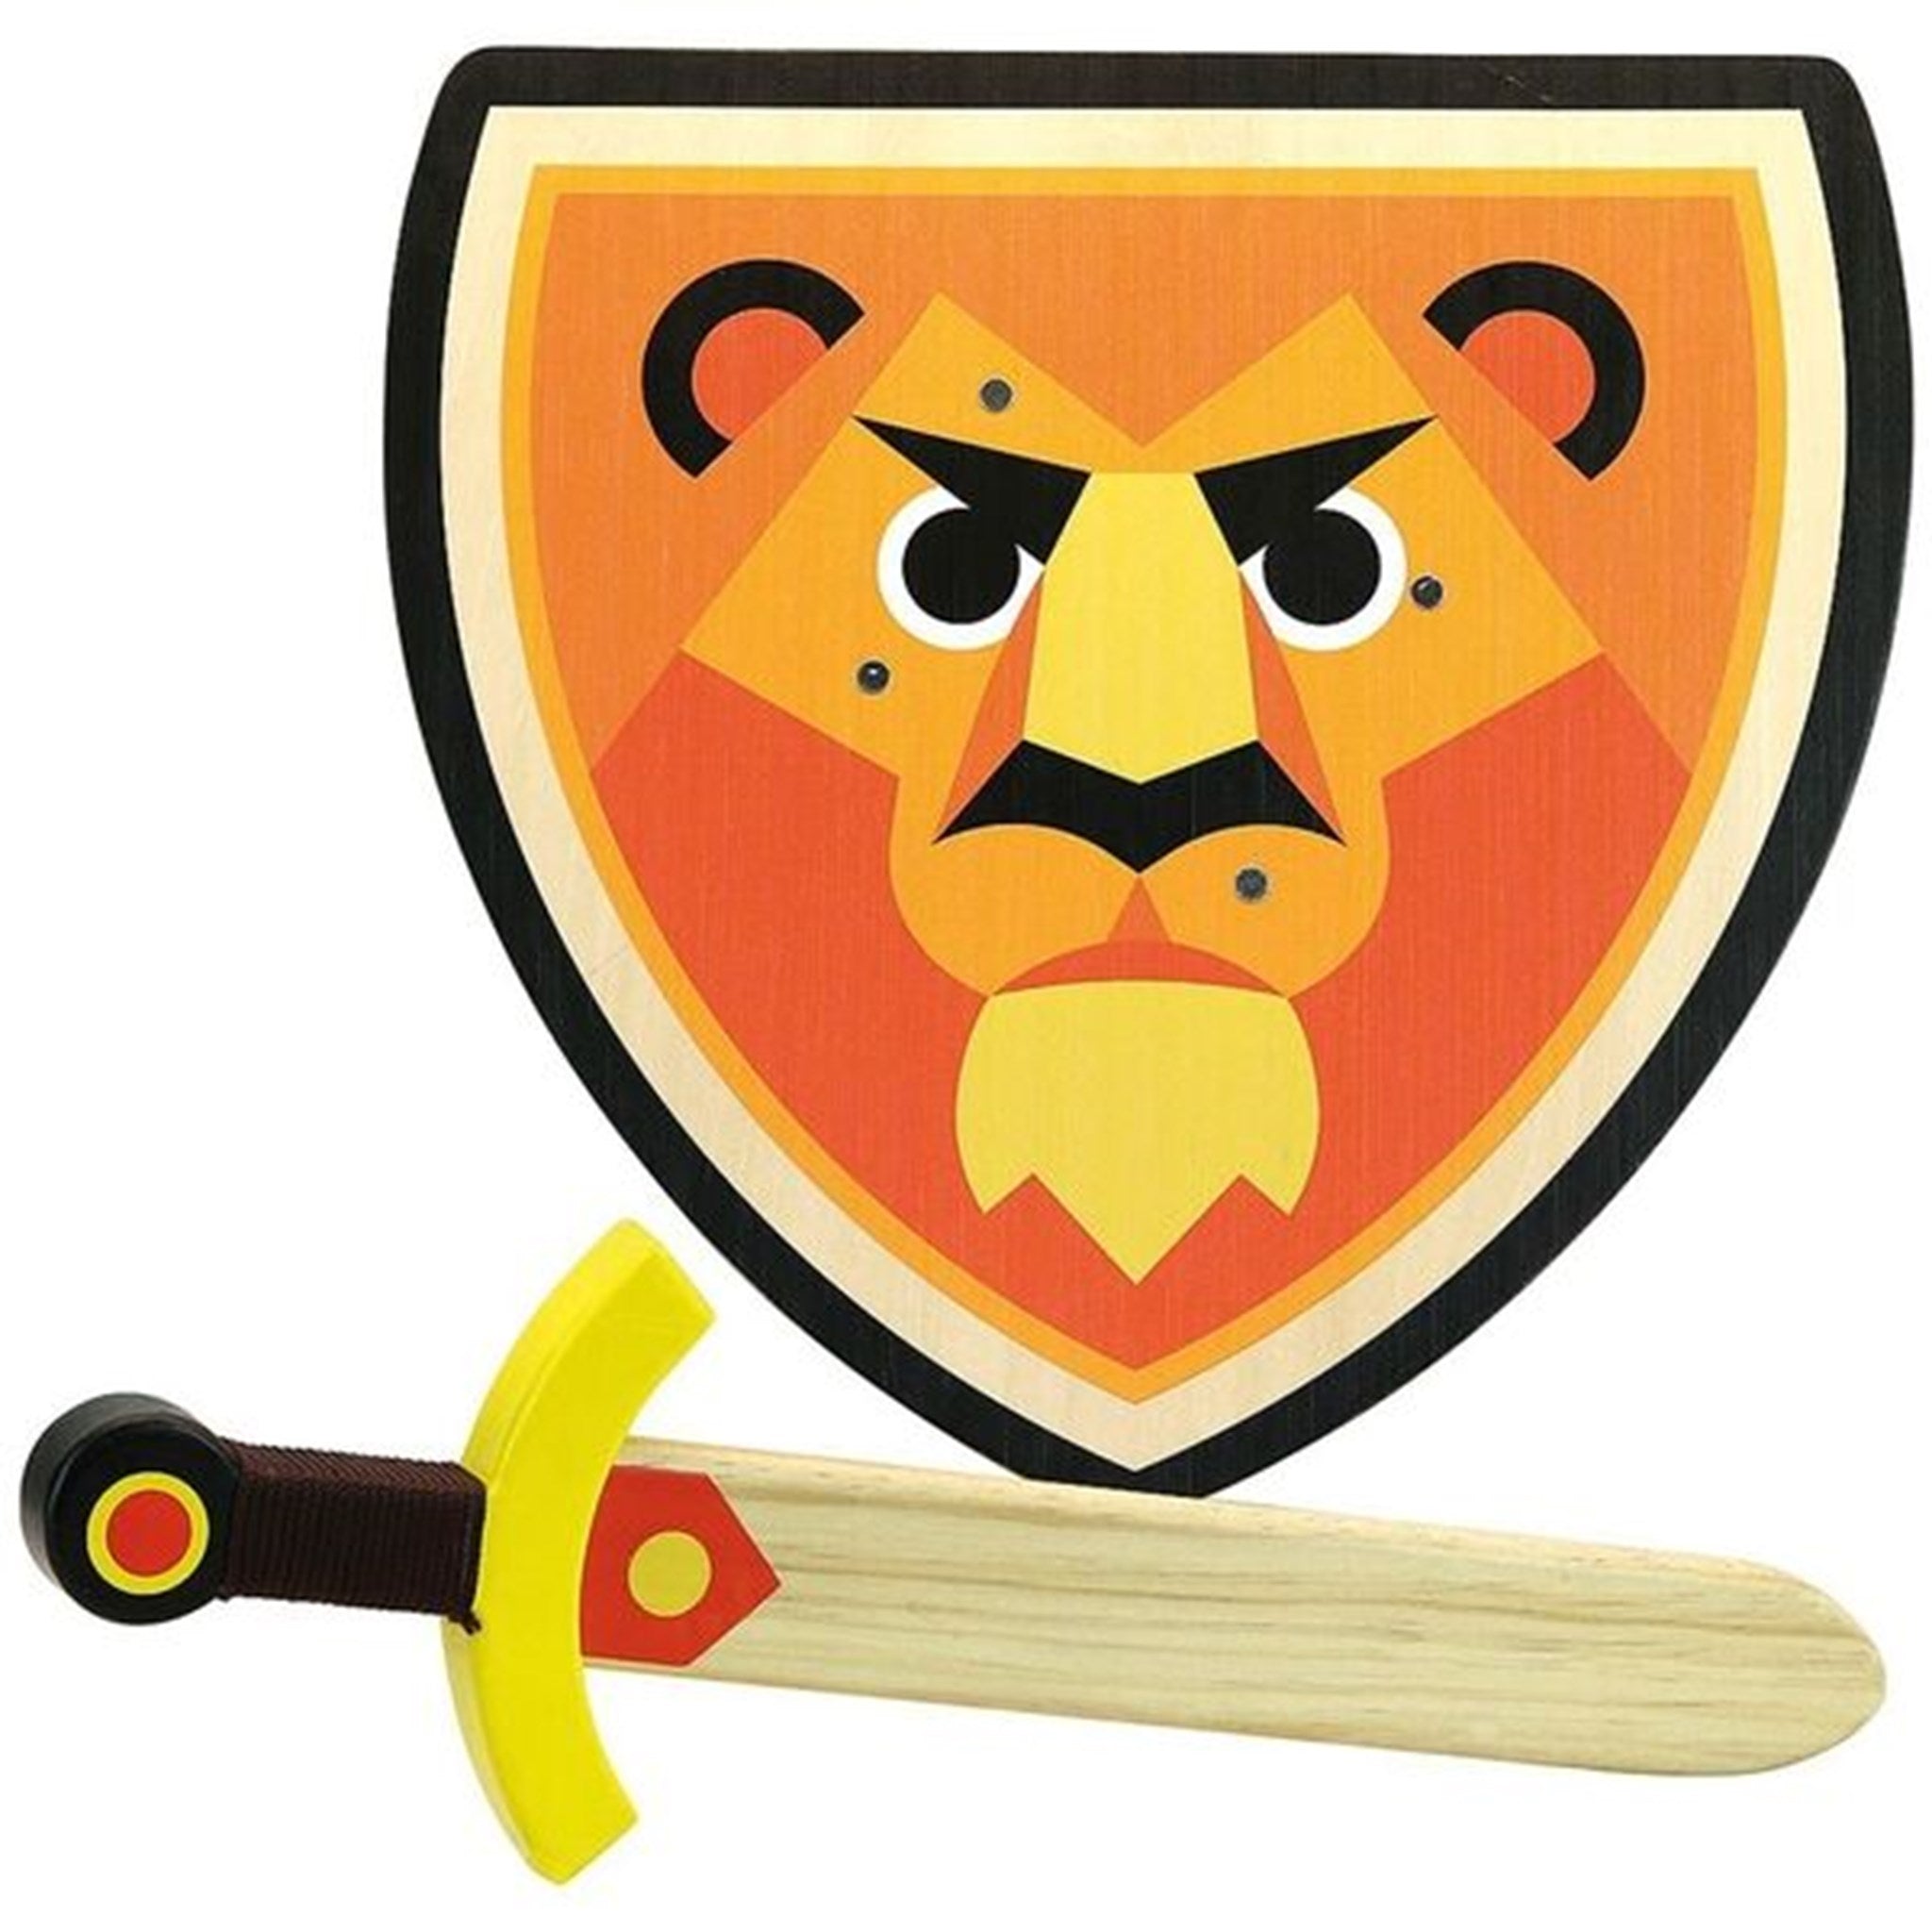 Vilac Wooden Sword and Shield - Lion